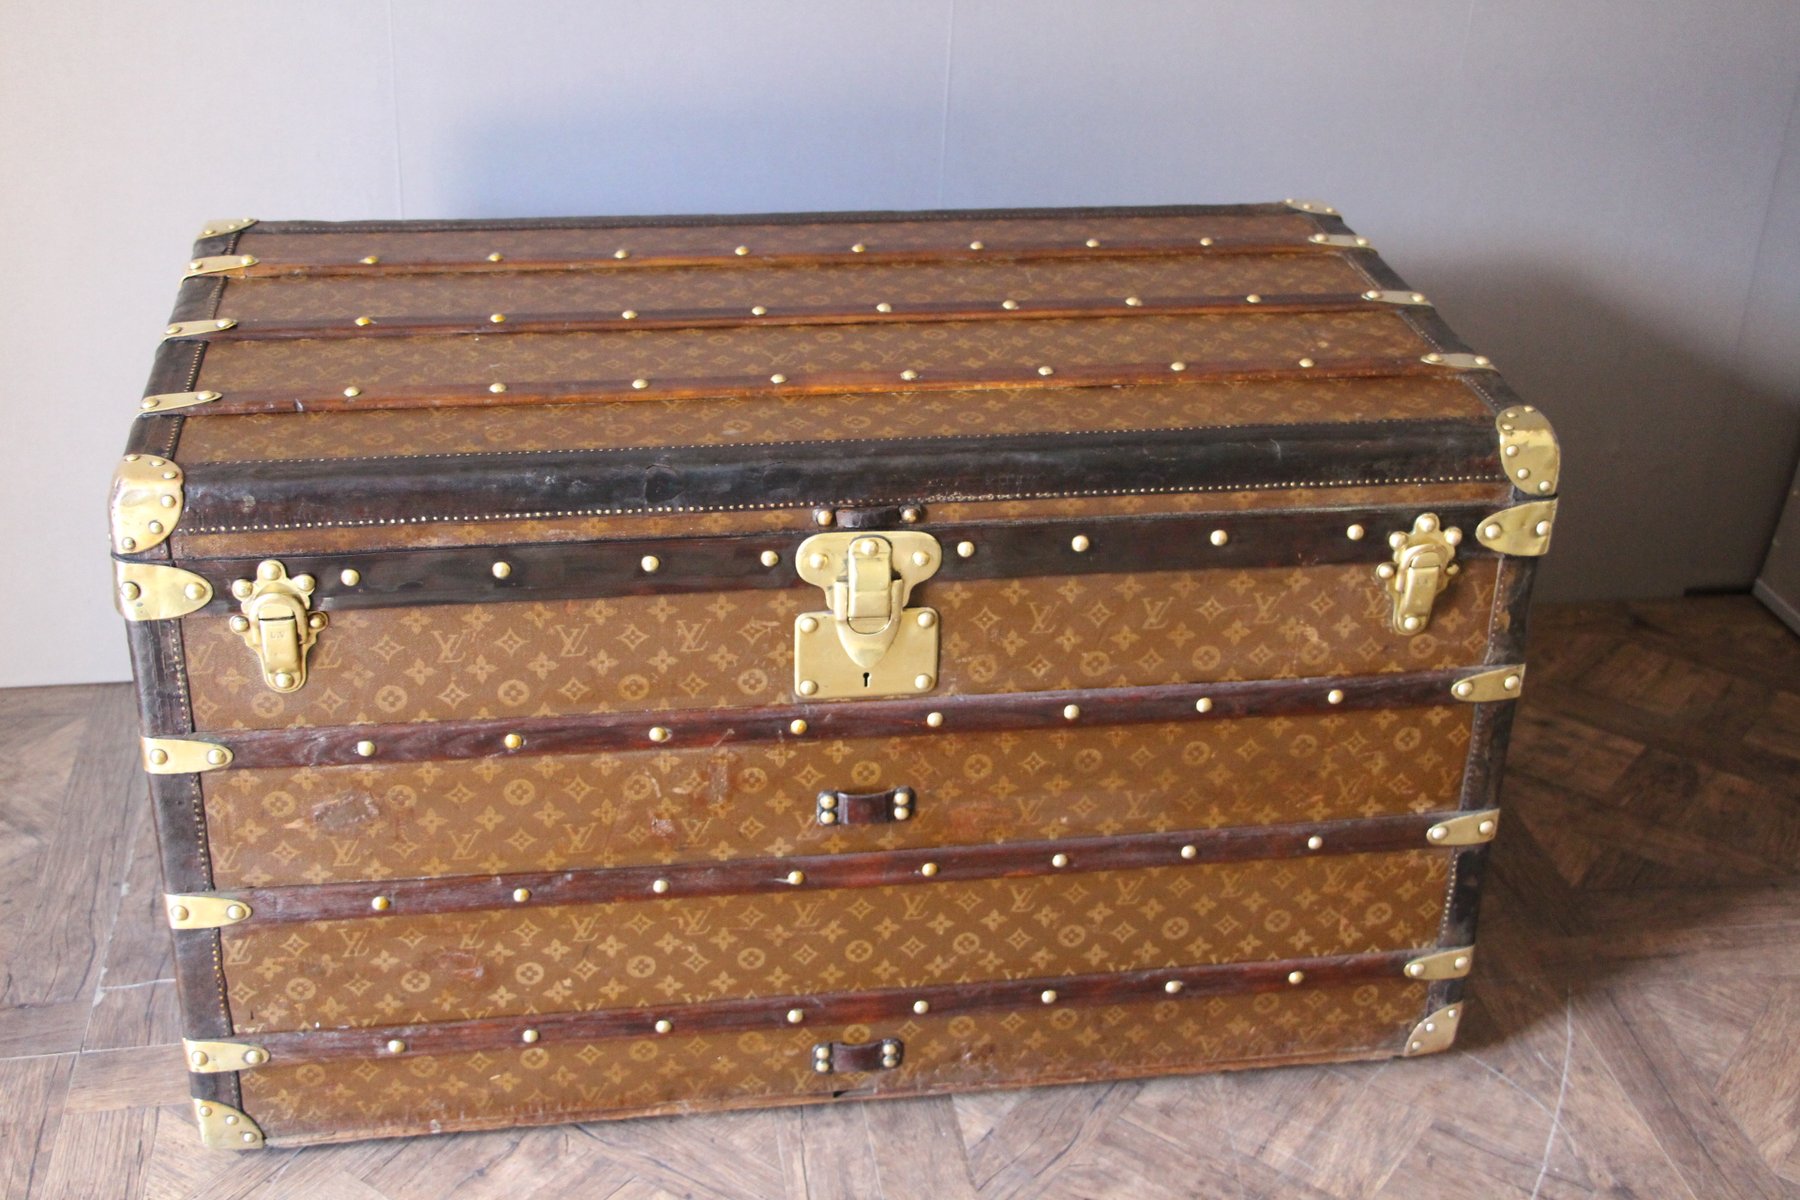 Vintage Stenciled Monogramm Steamer Trunk from Louis Vuitton for sale at Pamono